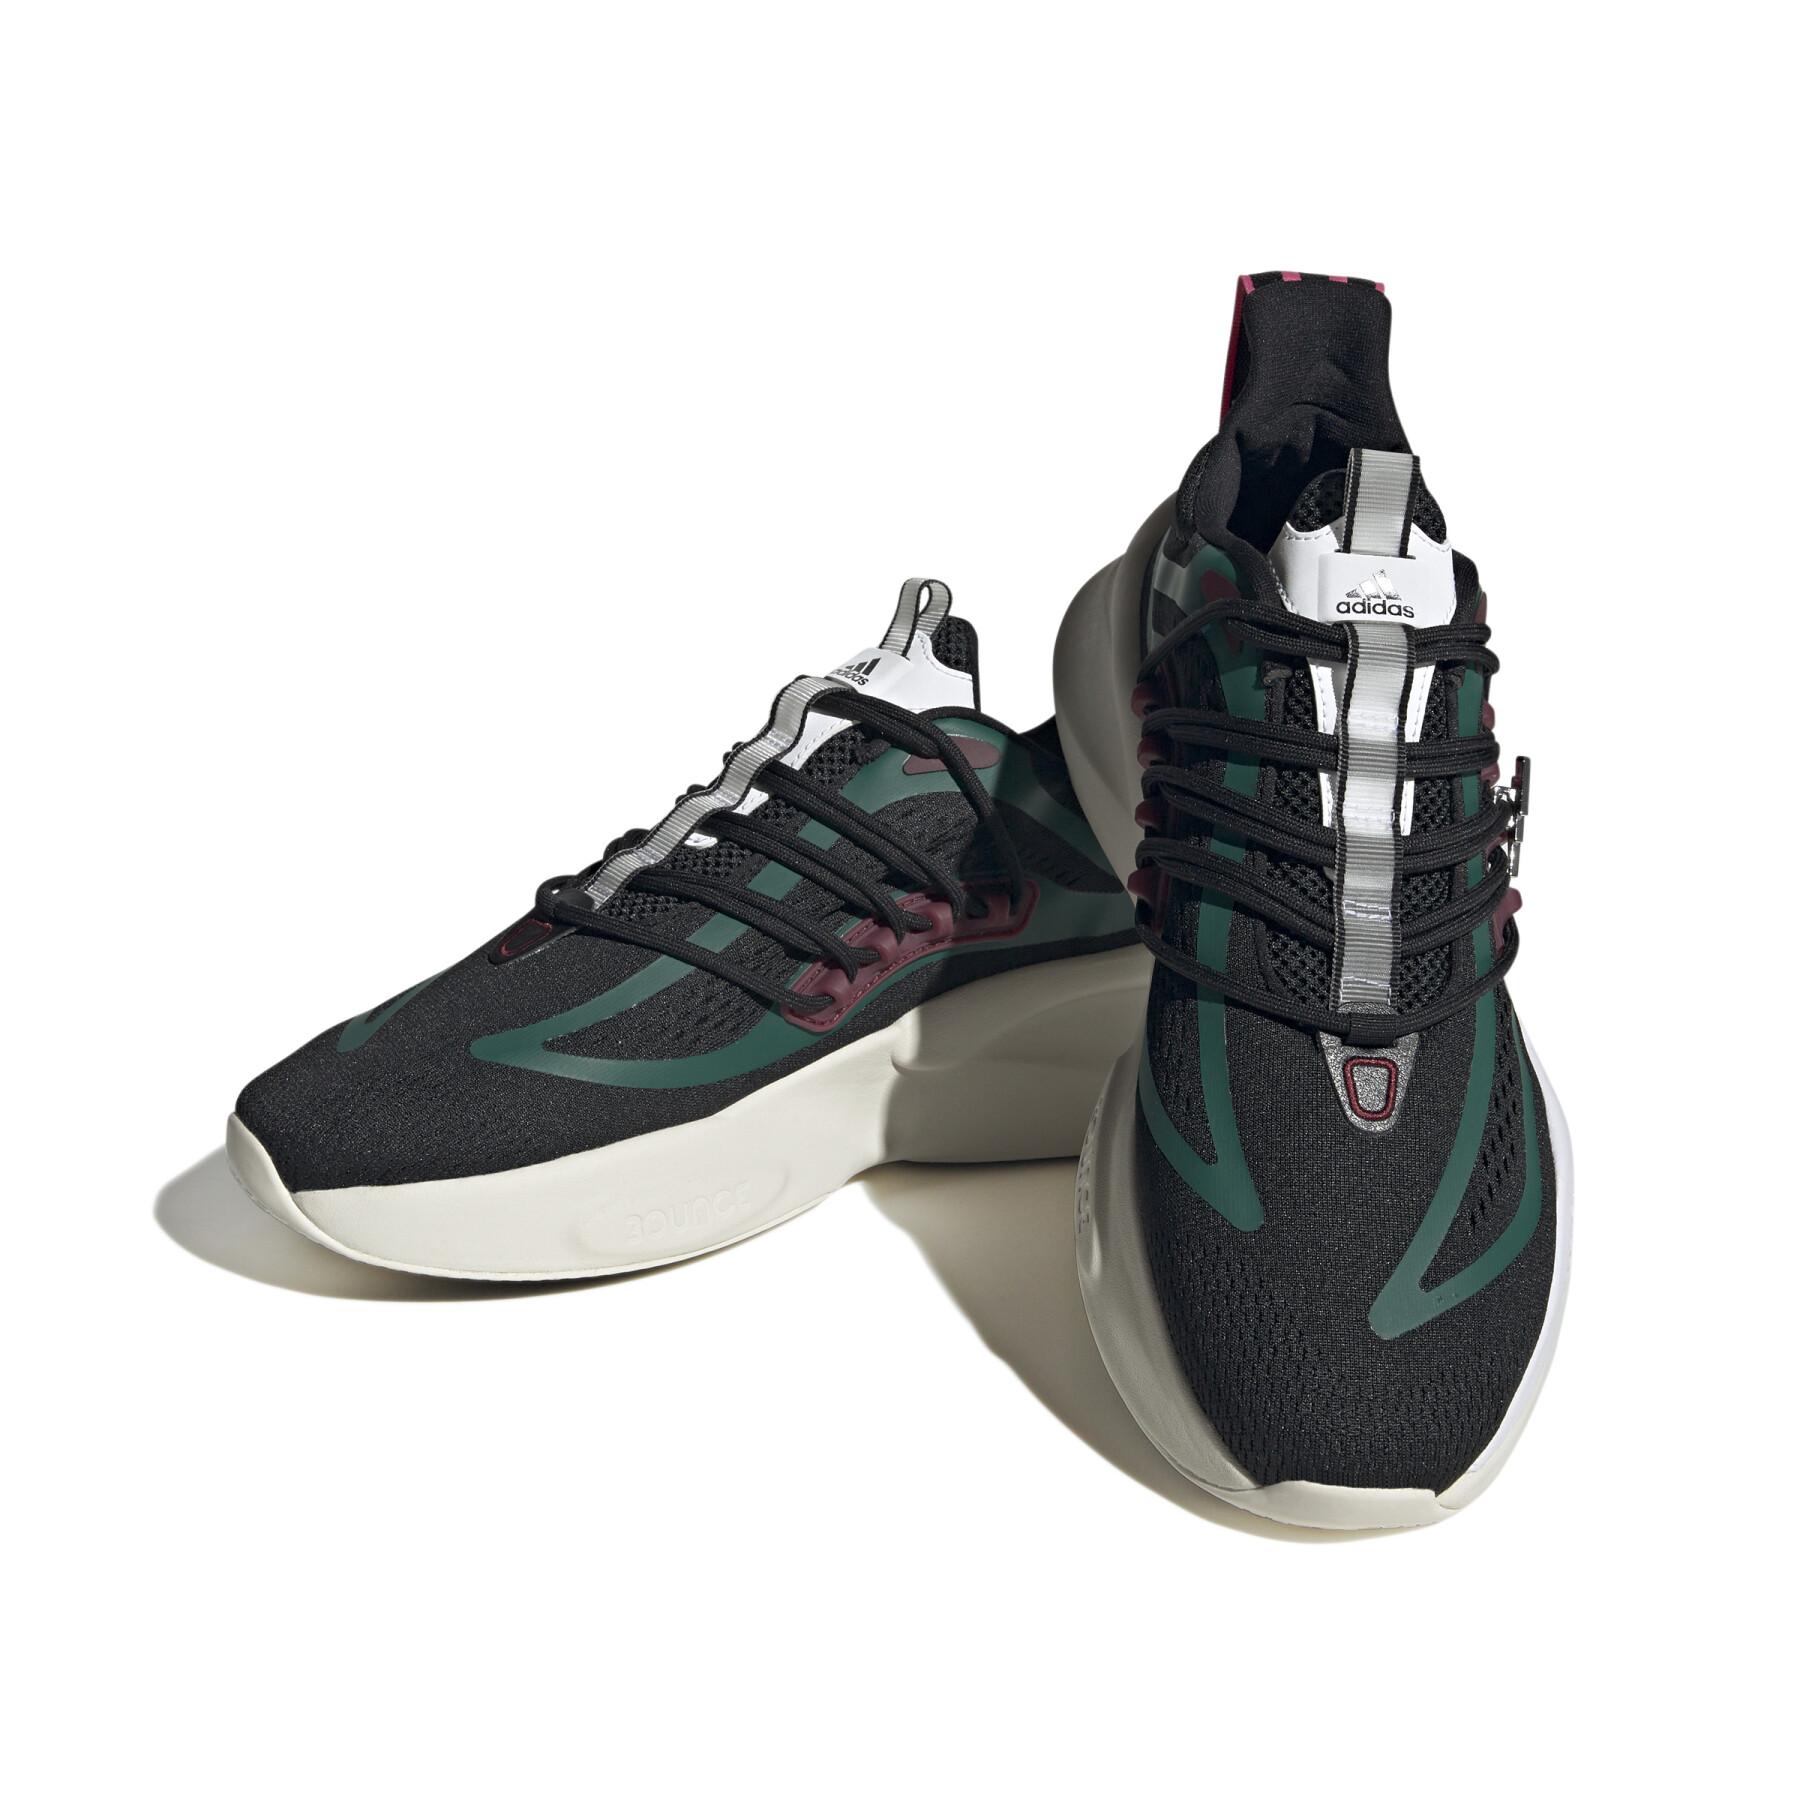 Sneakers adidas Alphaboost v1